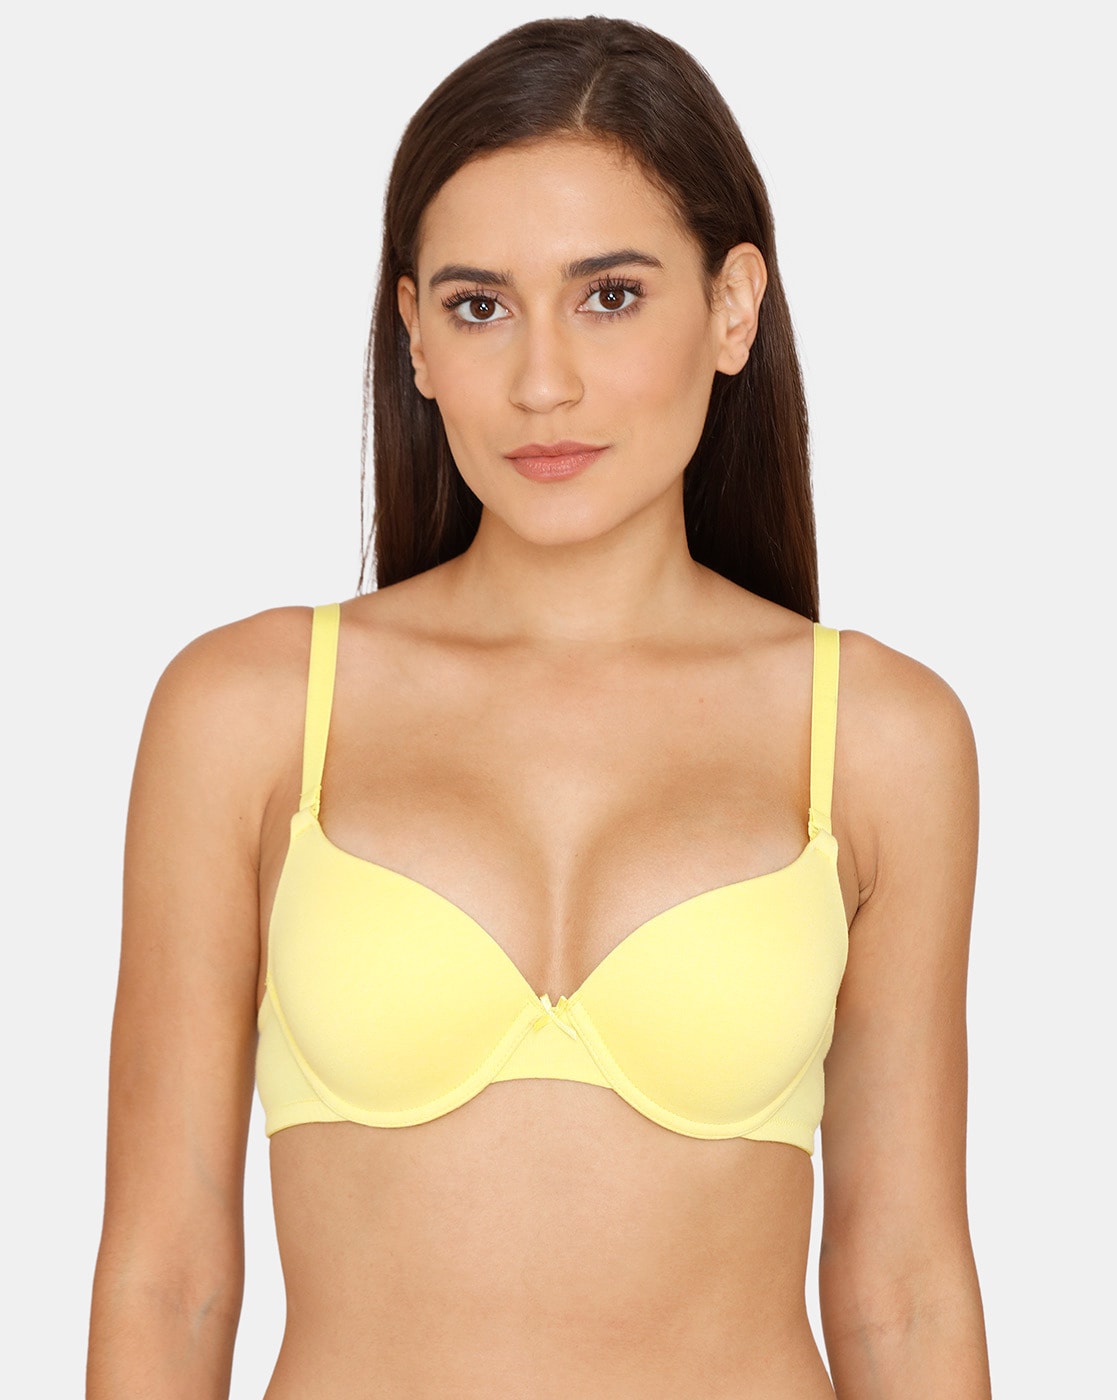 Shyle 38C Yellow Push Up Bra in Mohali - Dealers, Manufacturers